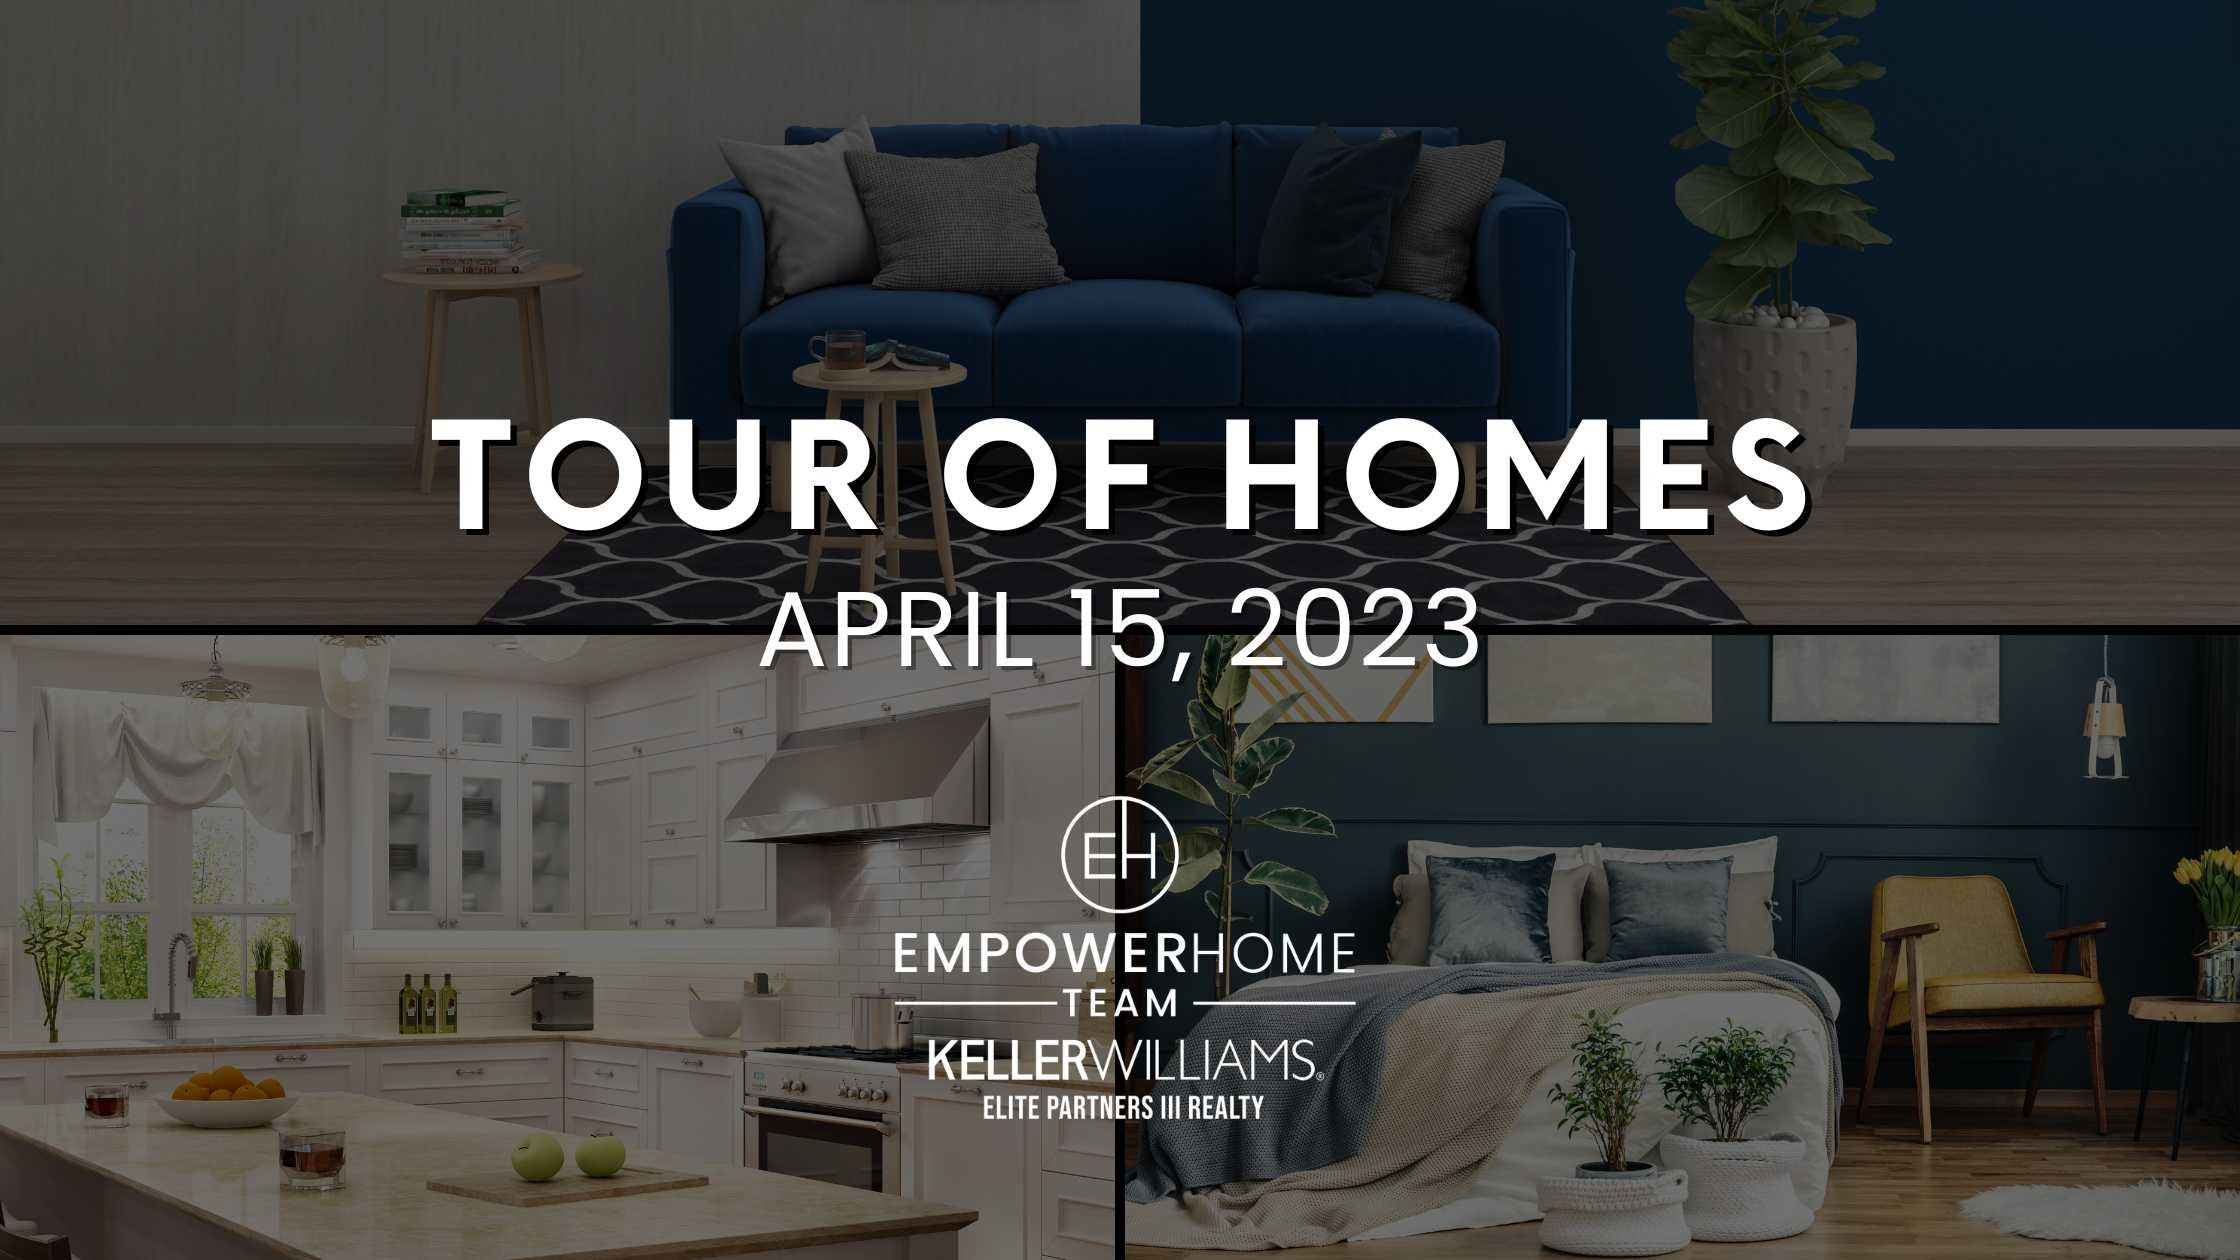 Orlando Tour of Homes In-Person April 15